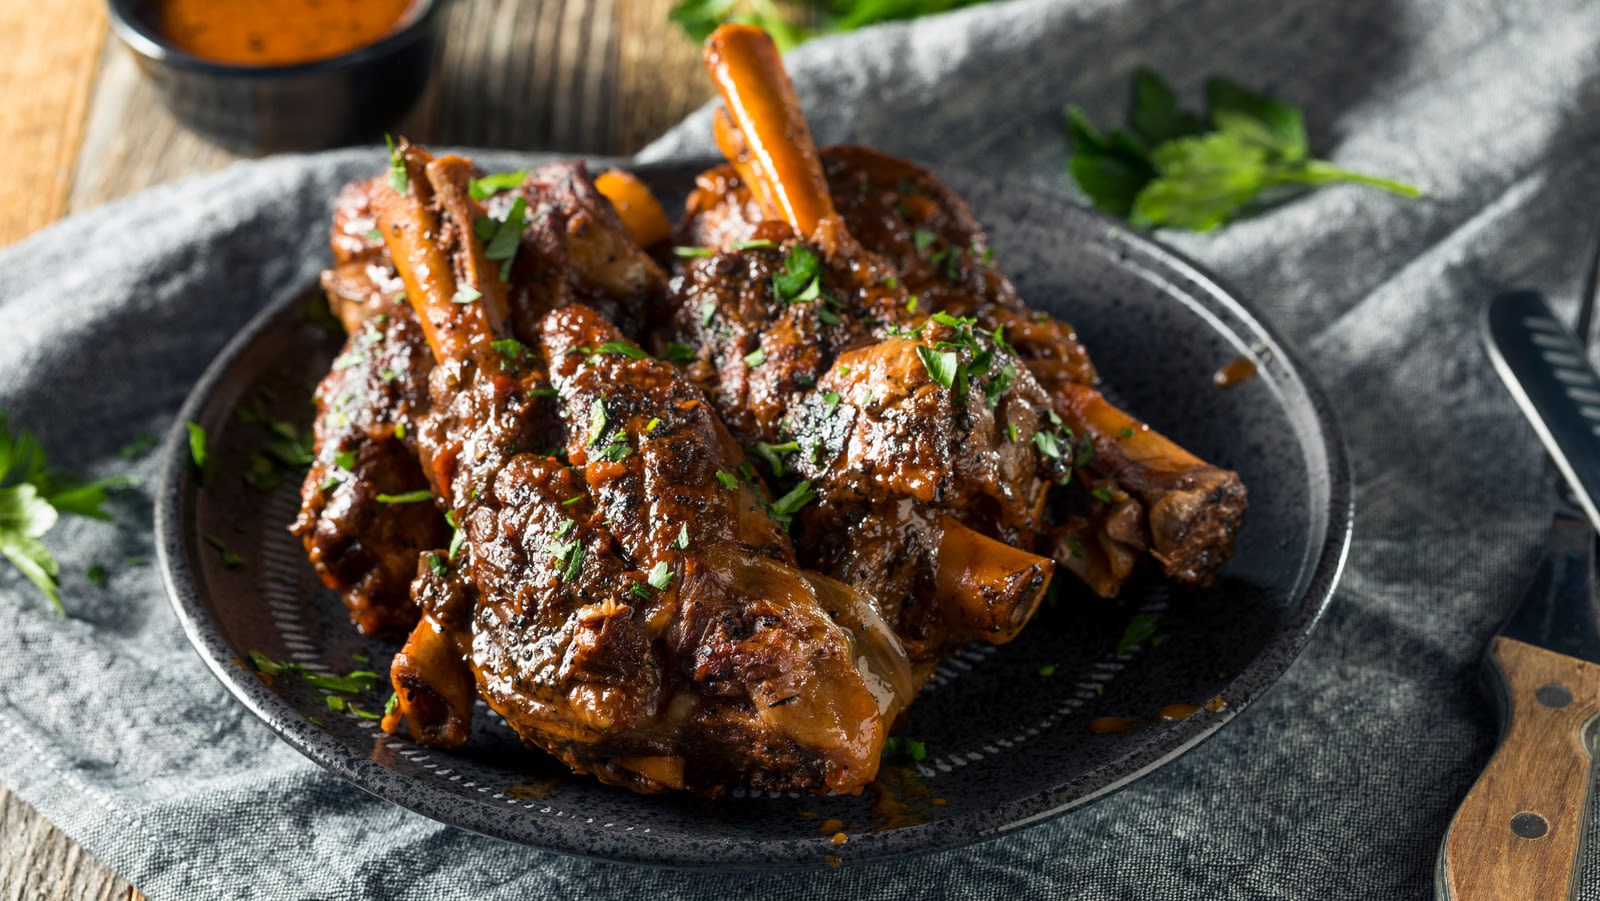 The Best Cut Of Lamb To Slow Cook, According To An Executive Chef